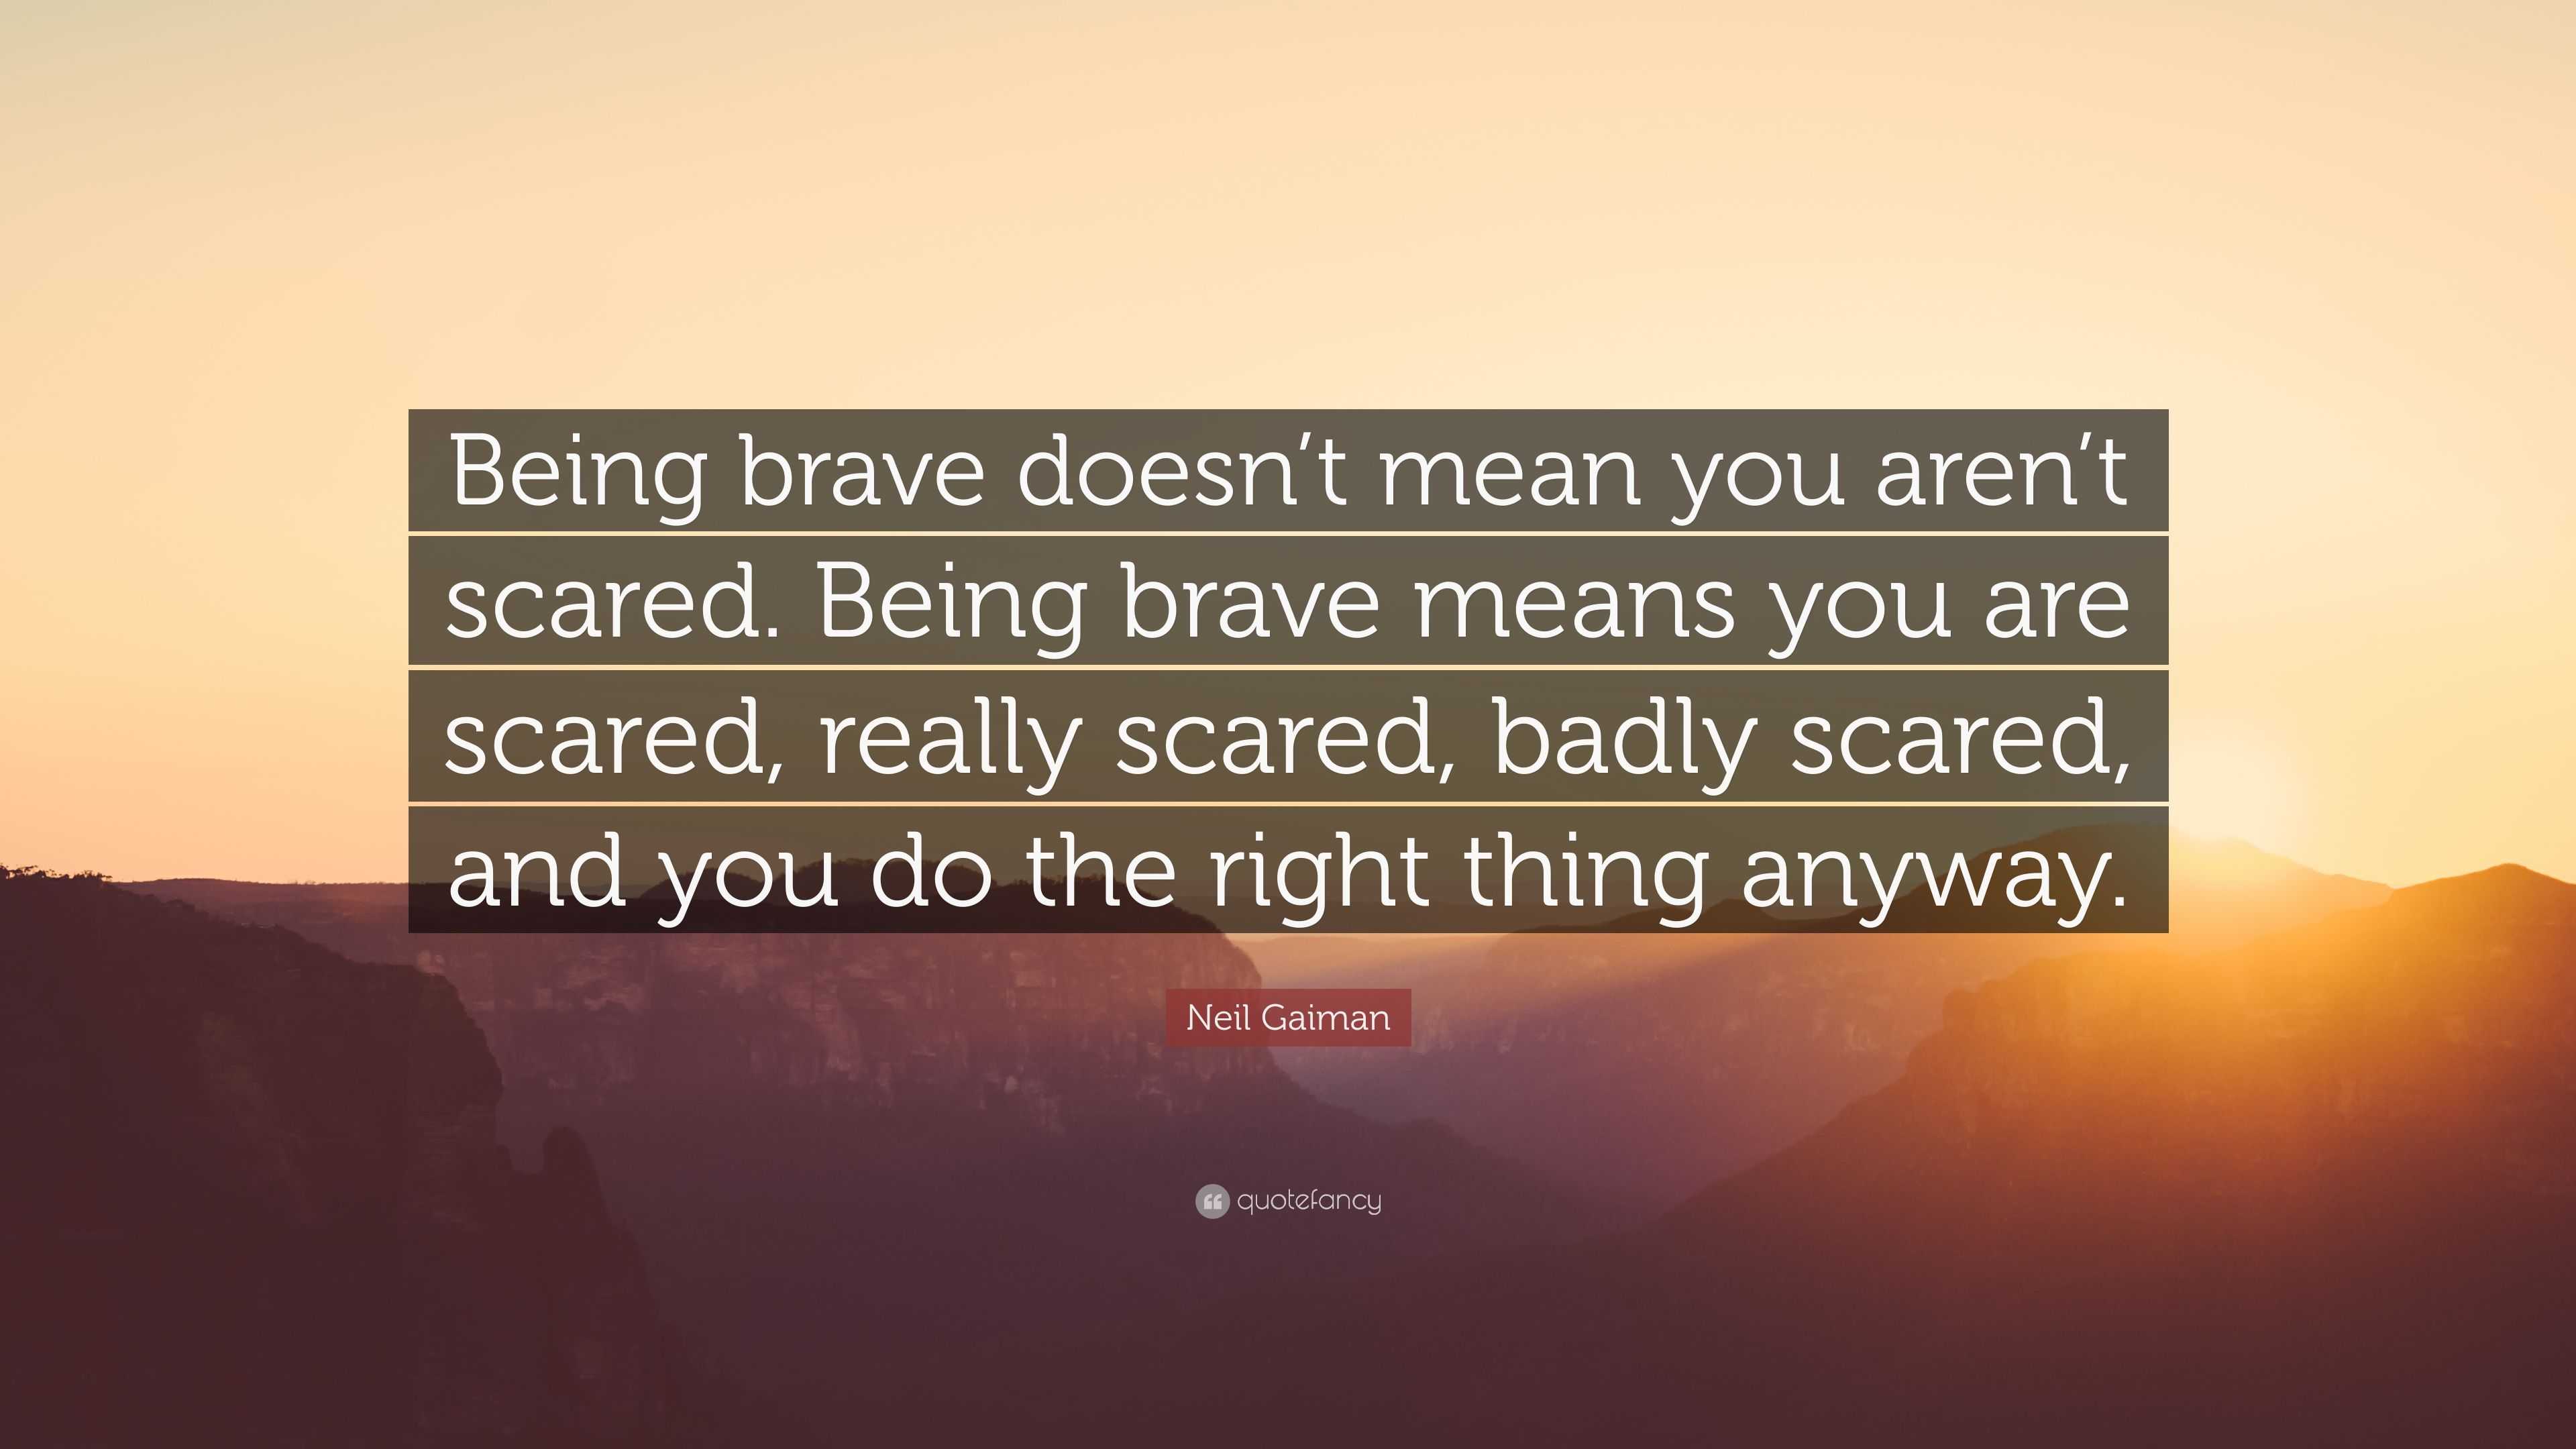 Neil Gaiman Quote: “Being brave doesn’t mean you aren’t scared. Being